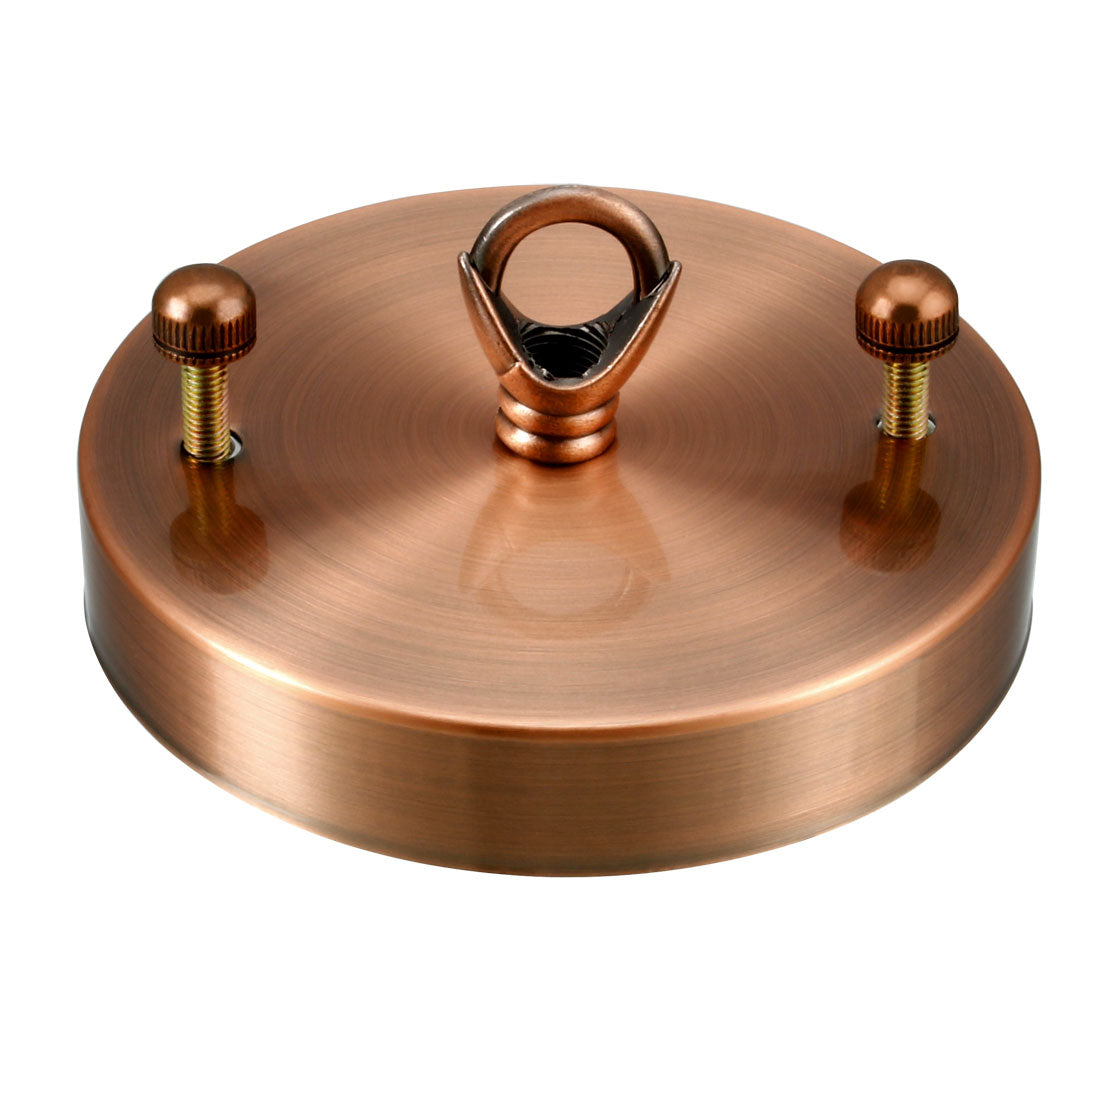 uxcell Uxcell Retro Ceiling Light Plate Pointed Base Chassis Disc Pendant Accessories 100mmx20mm Copper Tone w Screw 3pcs